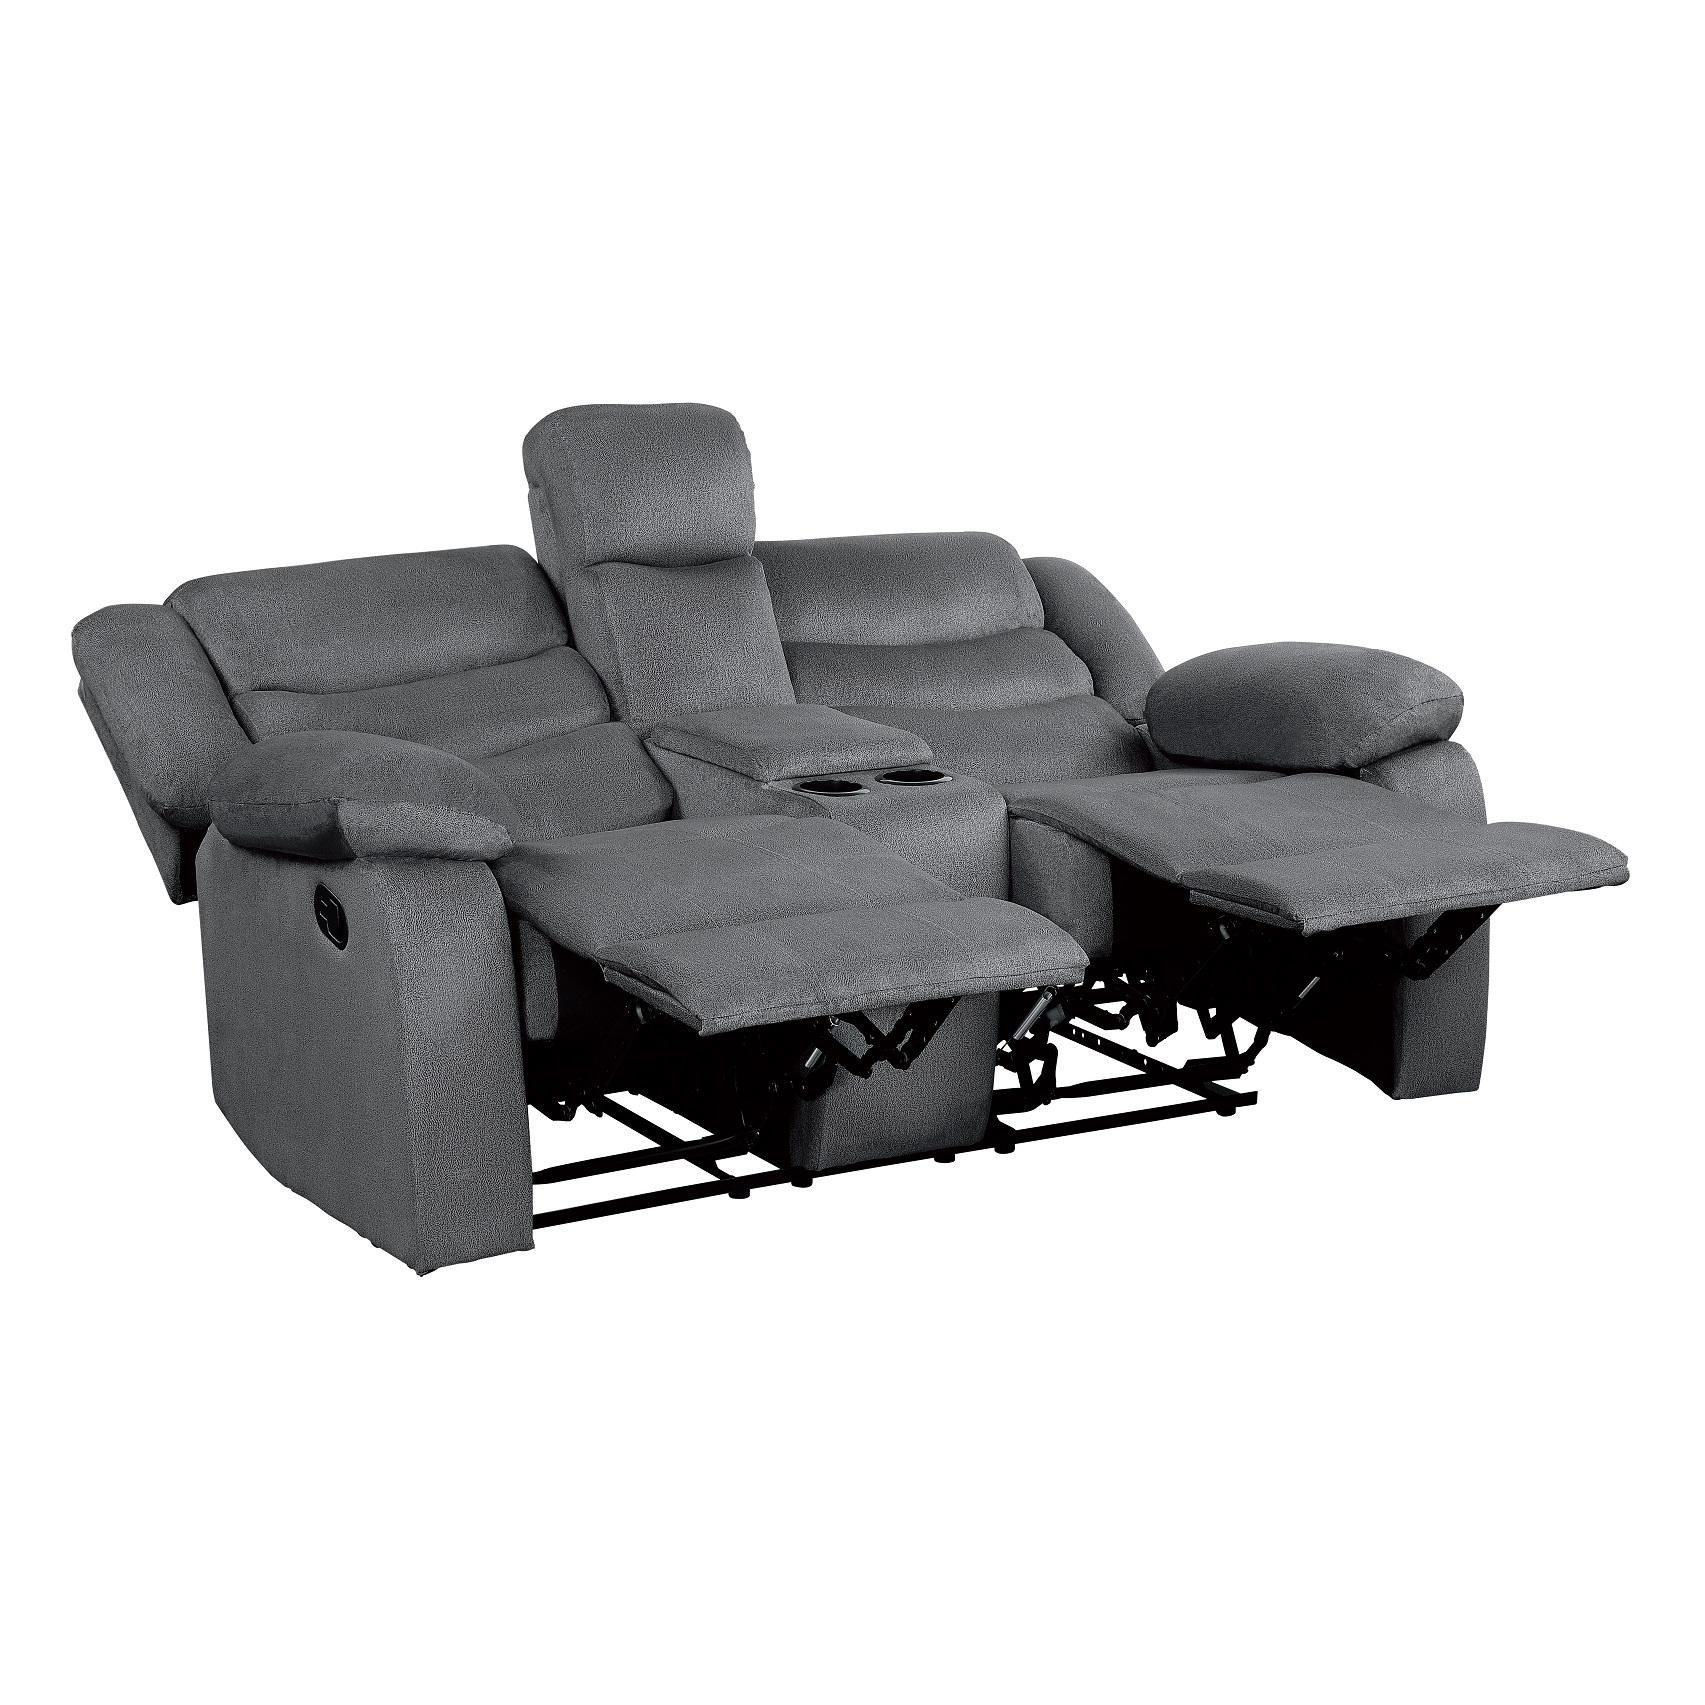 

    
9526GY-3PC Transitional Gray Microfiber Reclining Sofa Set 3pcs Homelegance 9526GY Discus
